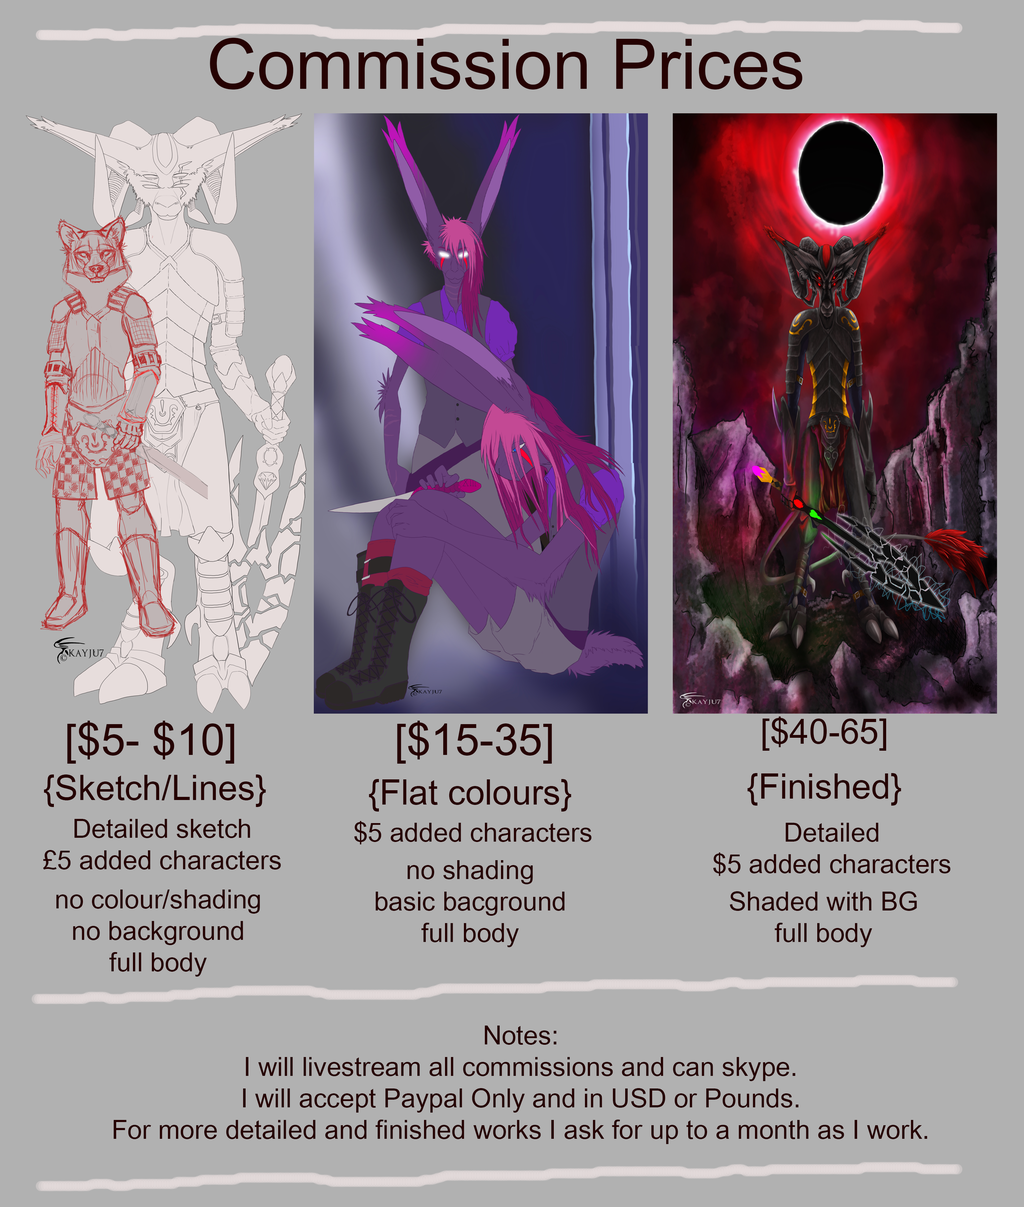 Most recent image: Commission prices